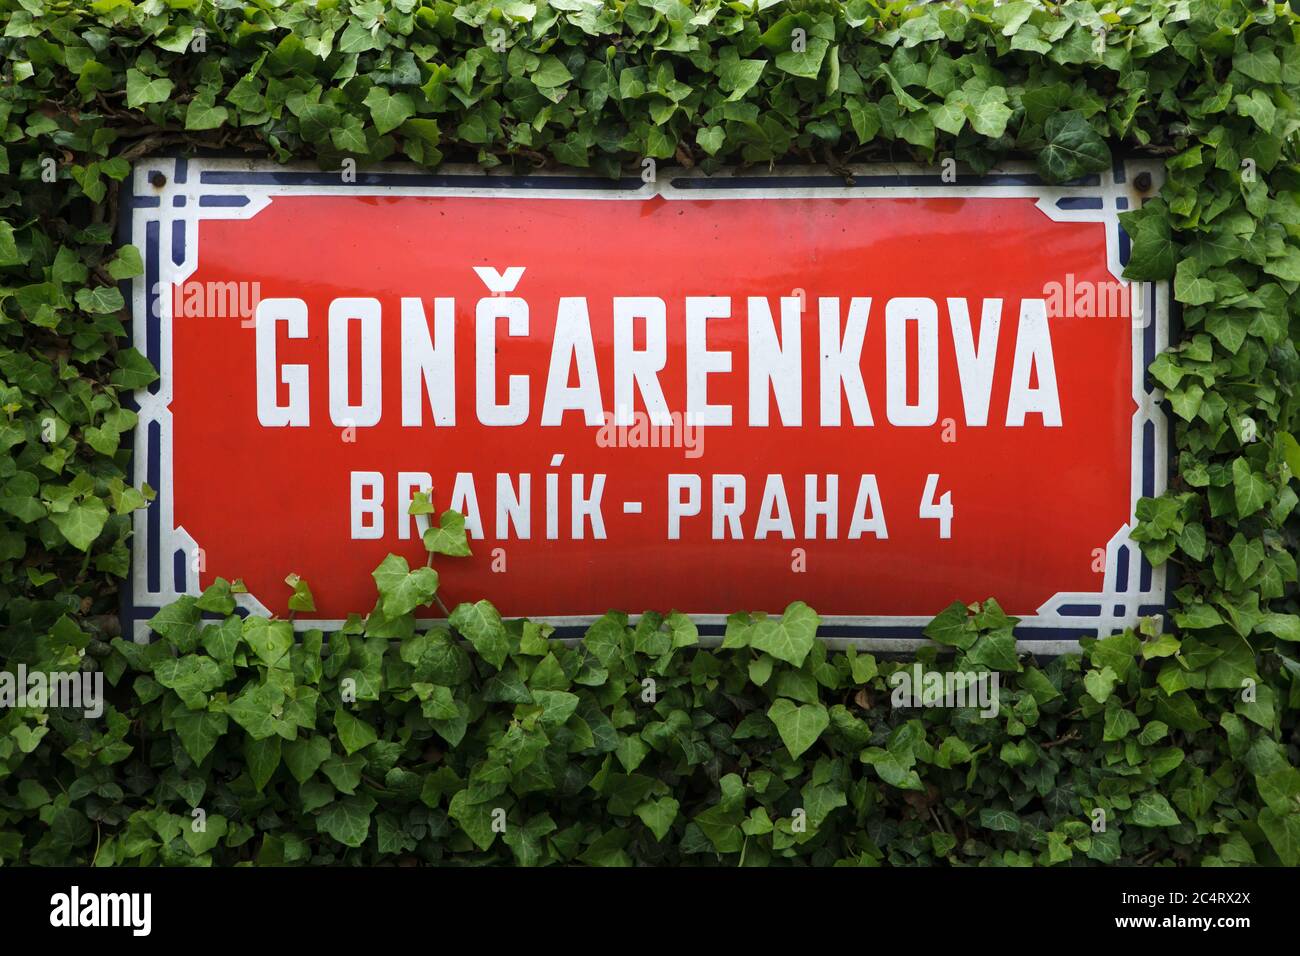 Gončarenkova Street. Traditional red street sign in Braník district in Prague, Czech Republic. The street is named after Soviet lieutenant Ivan Goncharenko (also spelled Ivan Gončarenko) who was a commander of the first Soviet tank T-34 which entered into Prague at the morning on 9 May 1945. The tank was hit by the Nazi Germans and Ivan Goncharenko died at age 24 near the Manes Bridge (Mánesův Bridge), becoming the first and probably the only Soviet soldier who died in Prague during the liberation of the capital of Czechoslovakia during World War II. Stock Photo